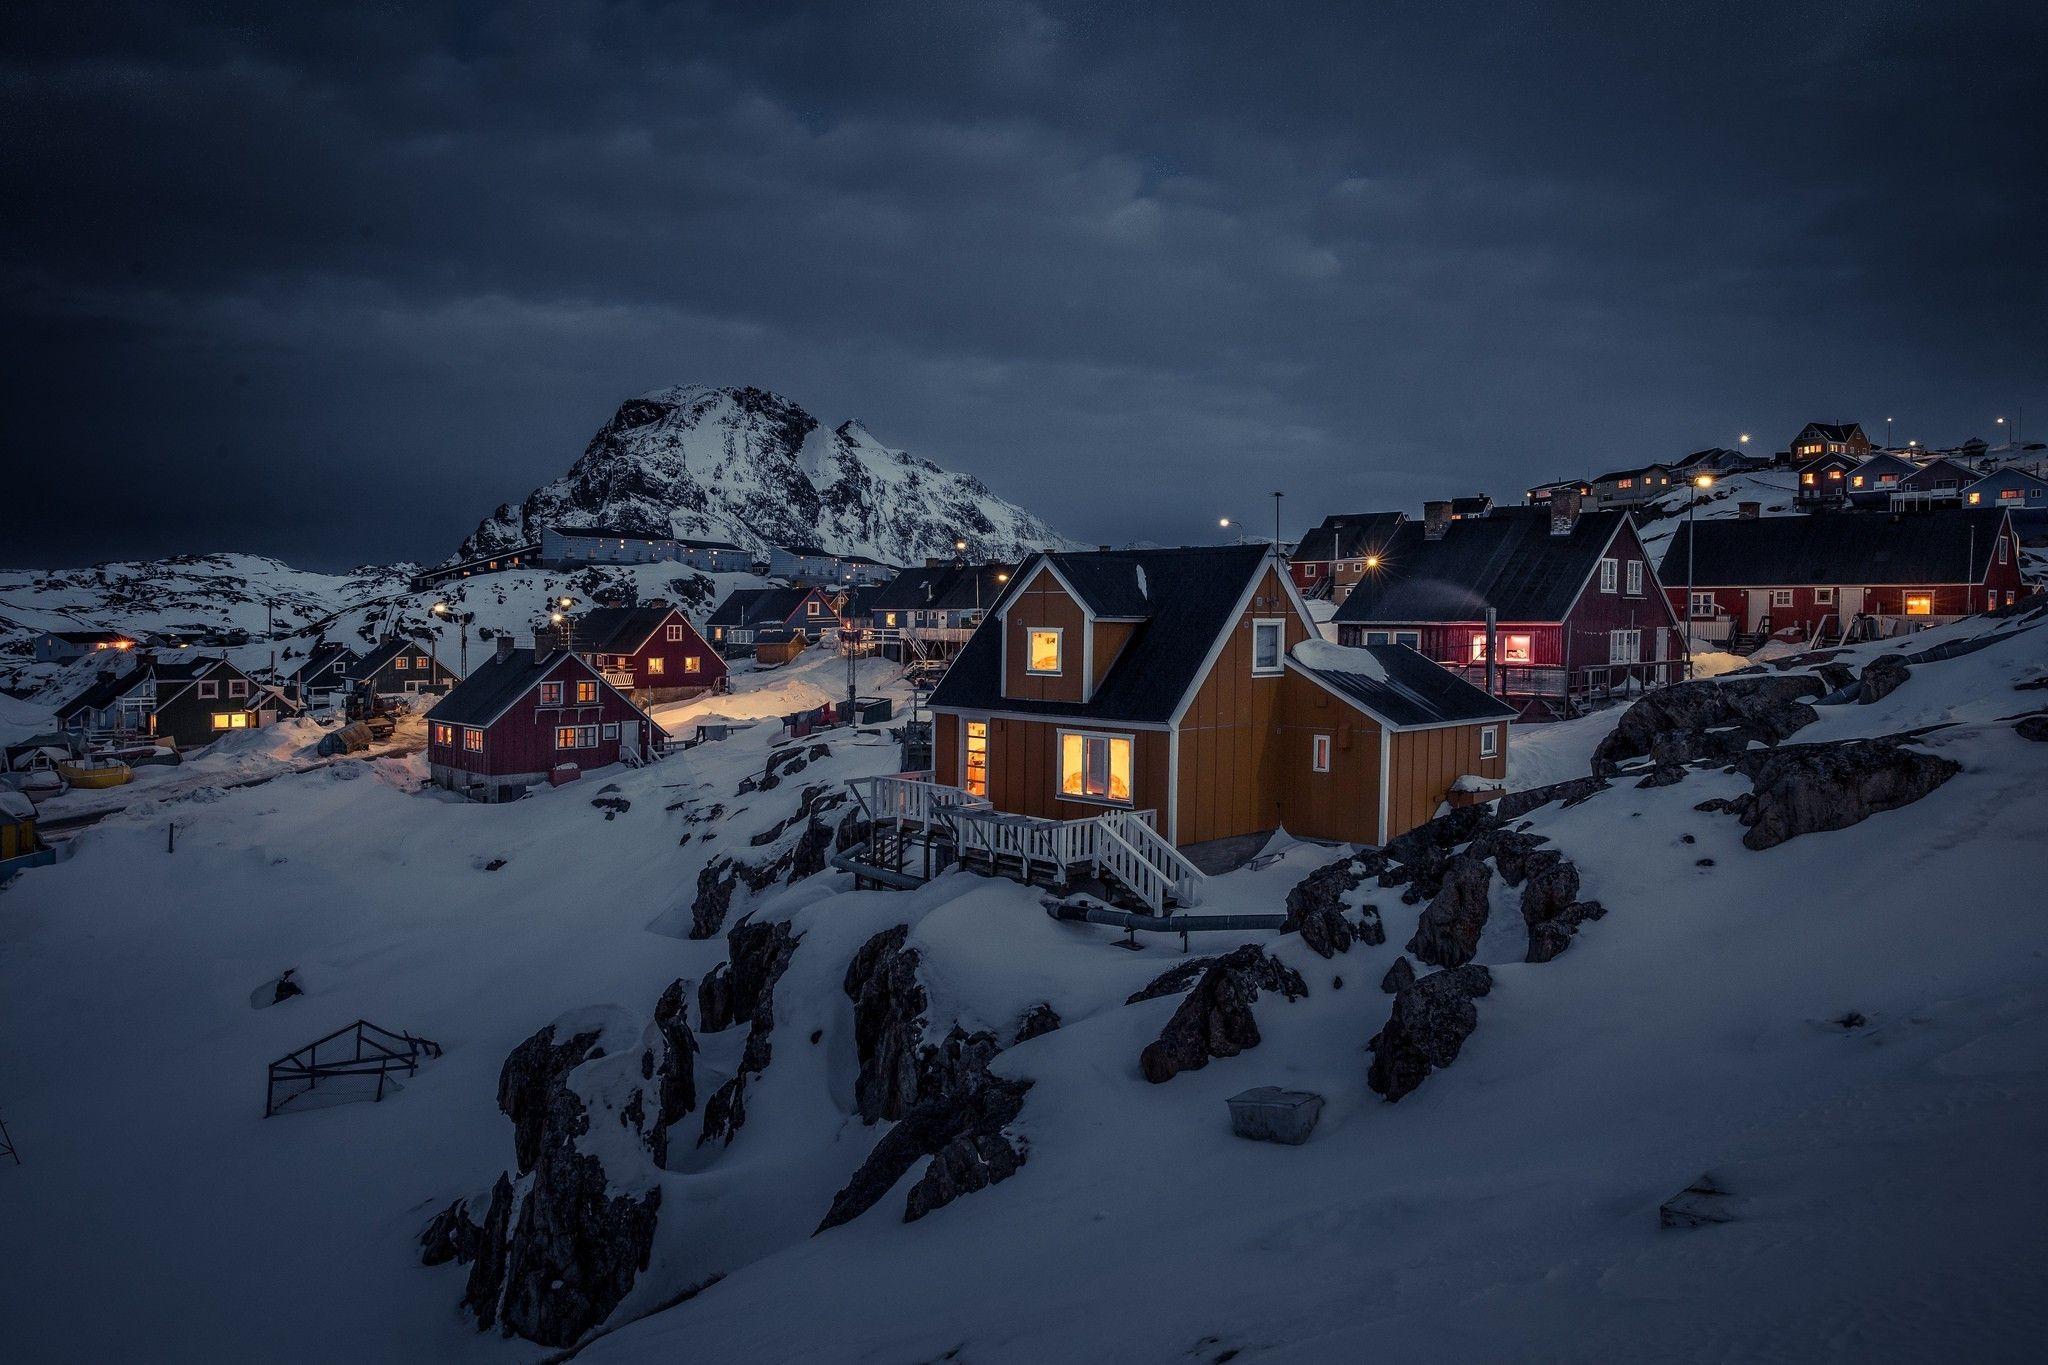 greenland night house landscape lights town snow overcast mountain